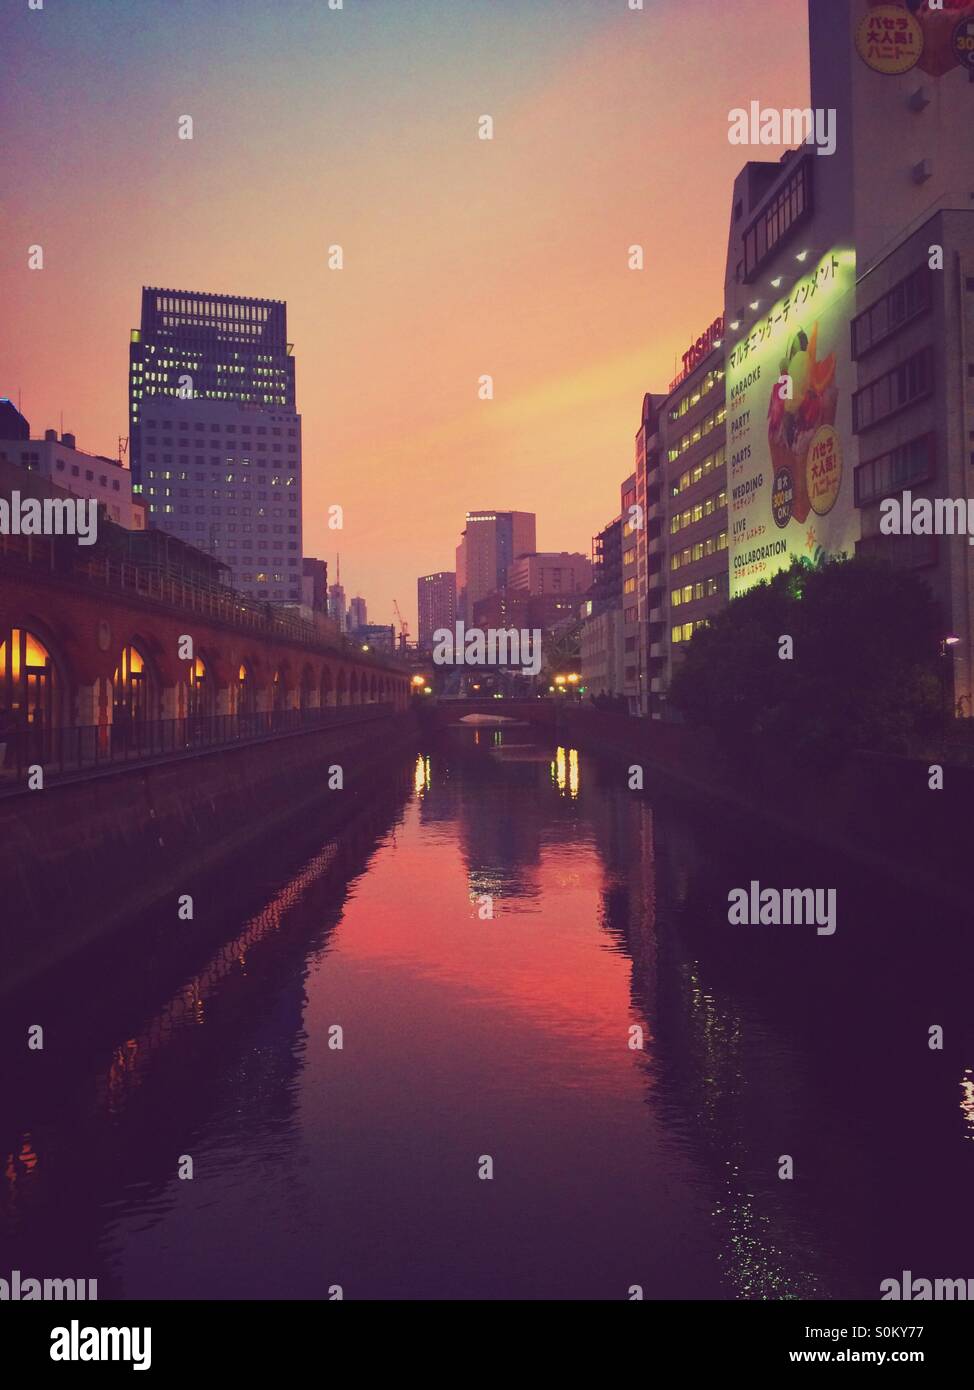 Sunset with city reflections on the water - Akihabara, Japan Stock Photo